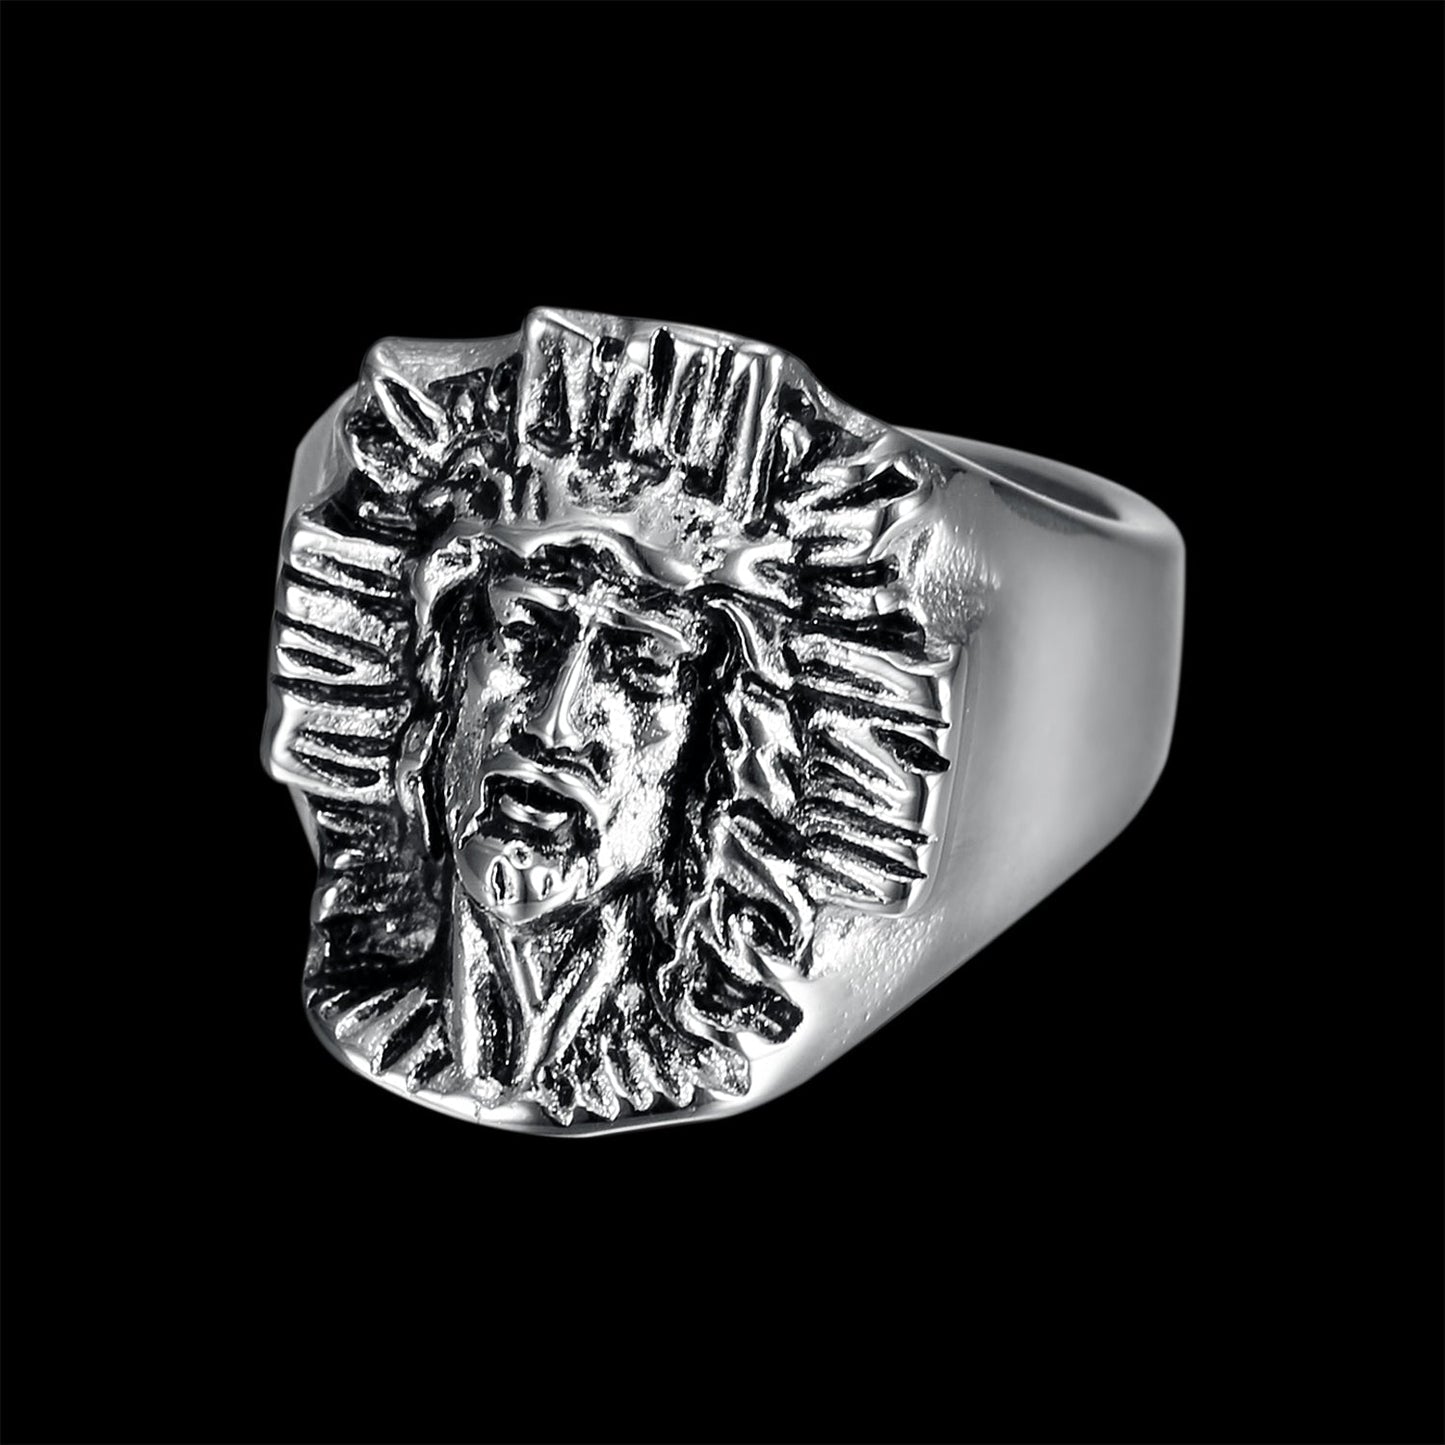 HAND CARVED JESUS RING